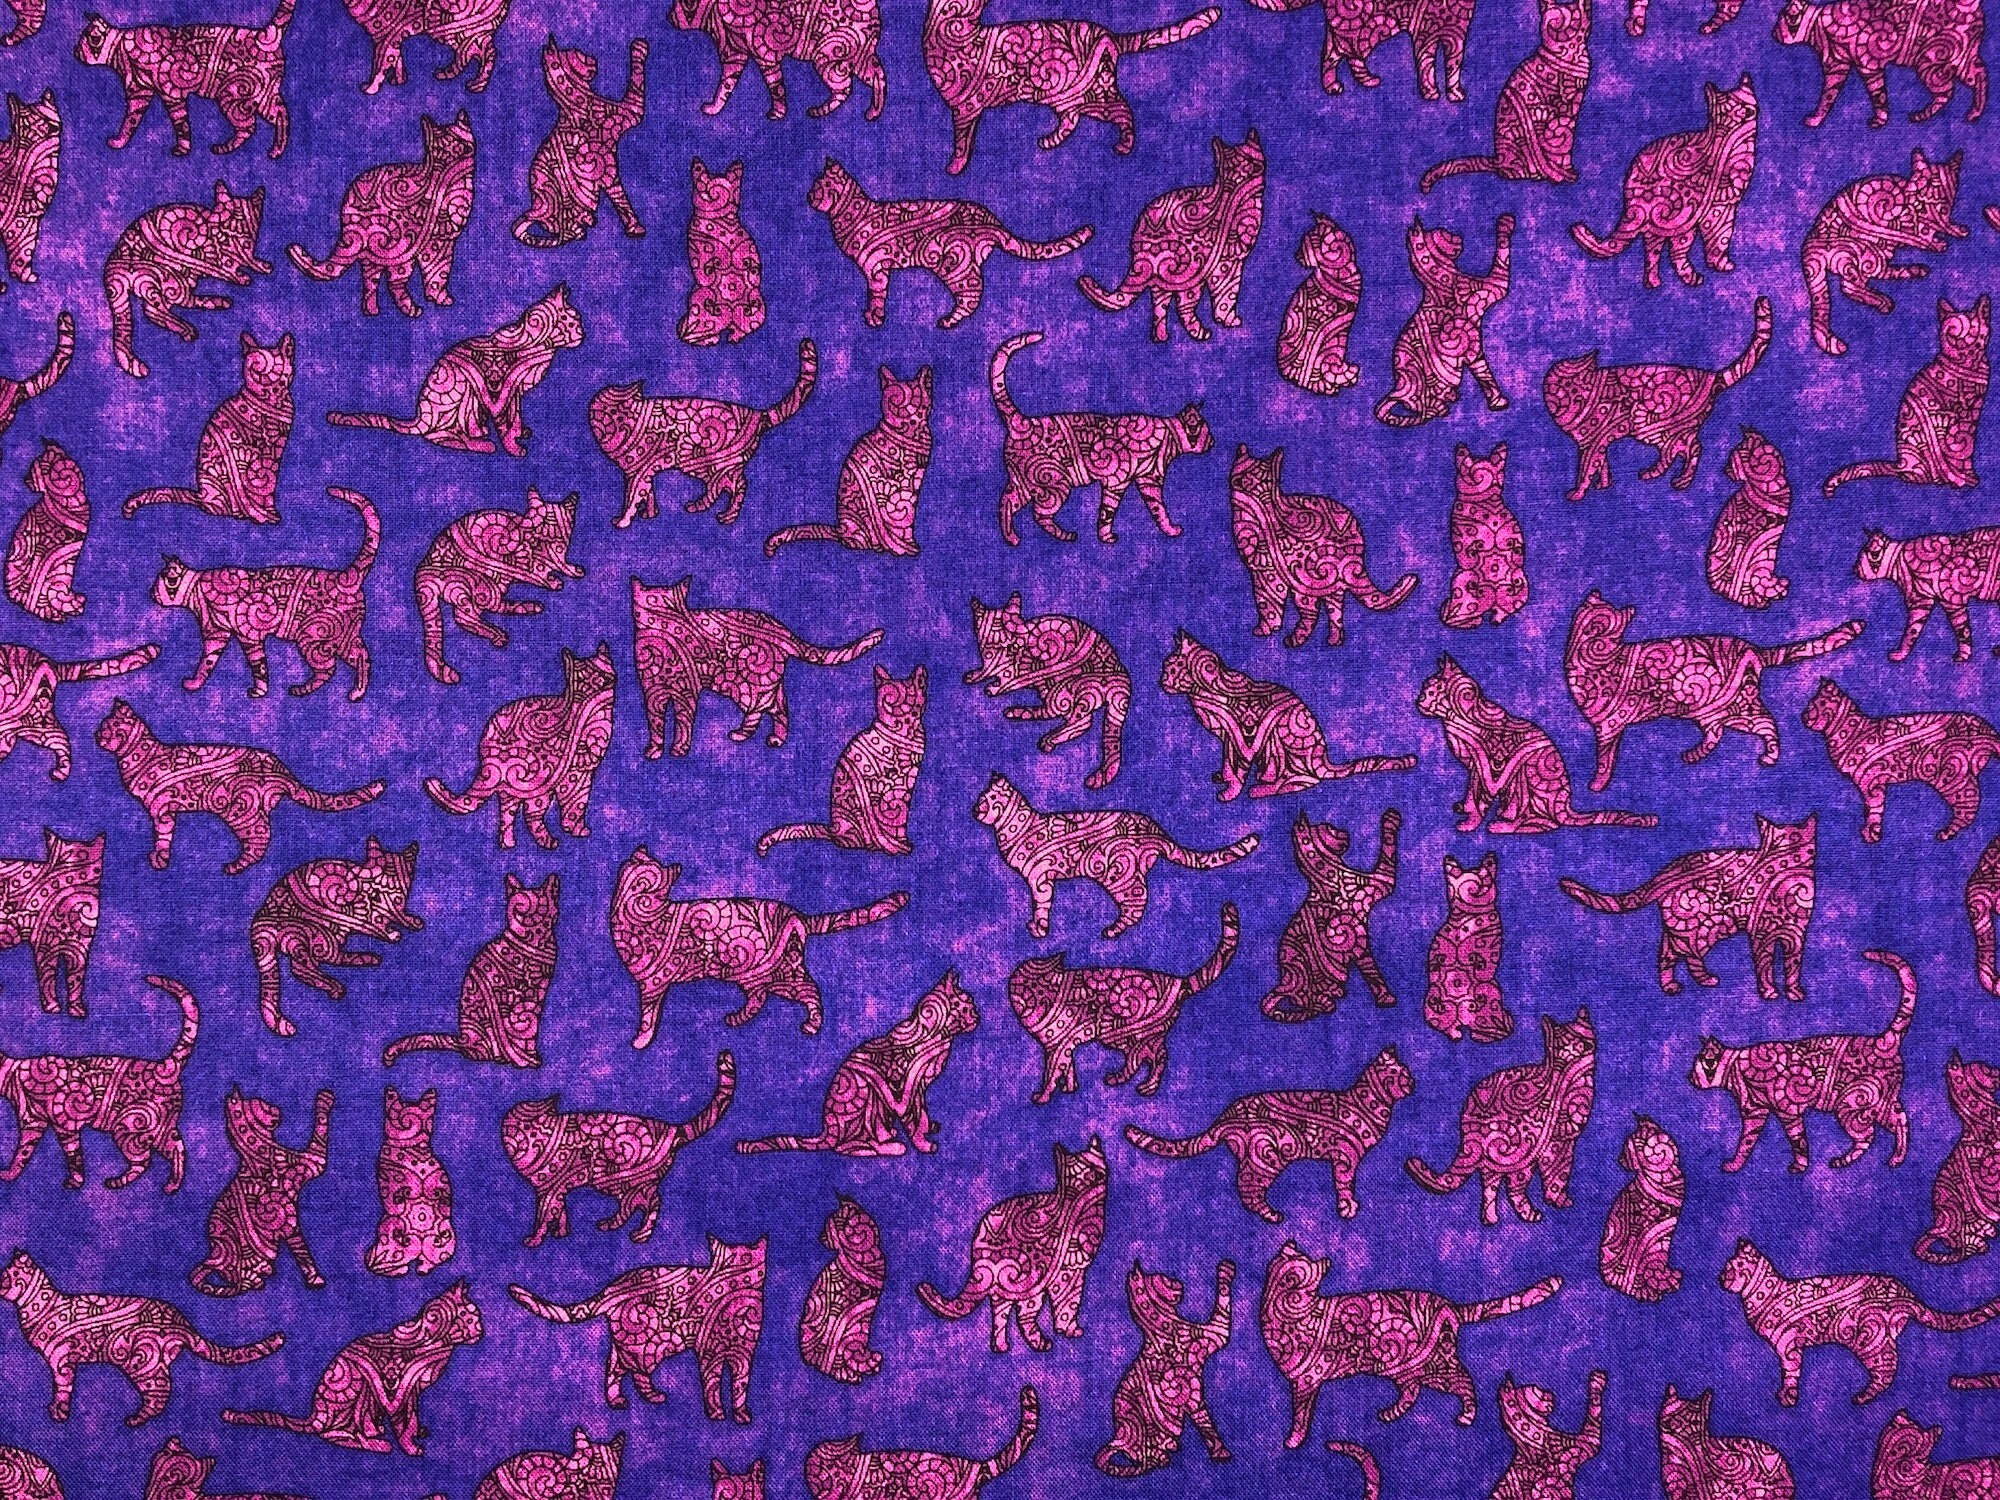 This purple fabric is covered with pink cat silhouettes. The Silhouettes have various scroll designs in them.